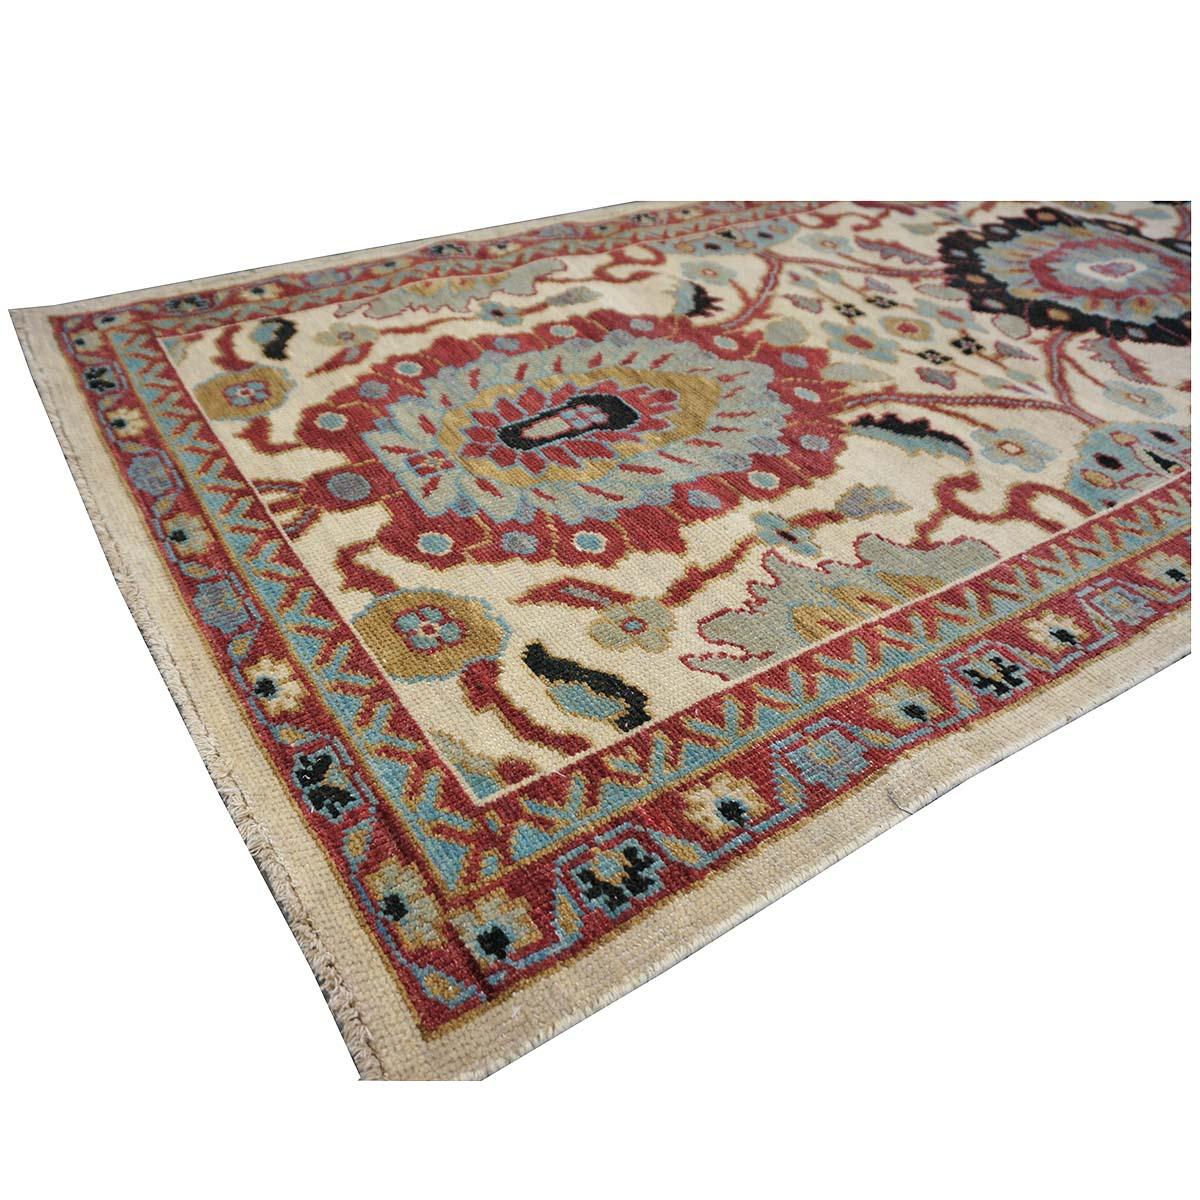 Contemporary 21st Century Sultanabad 3x12 Ivory, Red, & Blue Hall Runner Rug For Sale